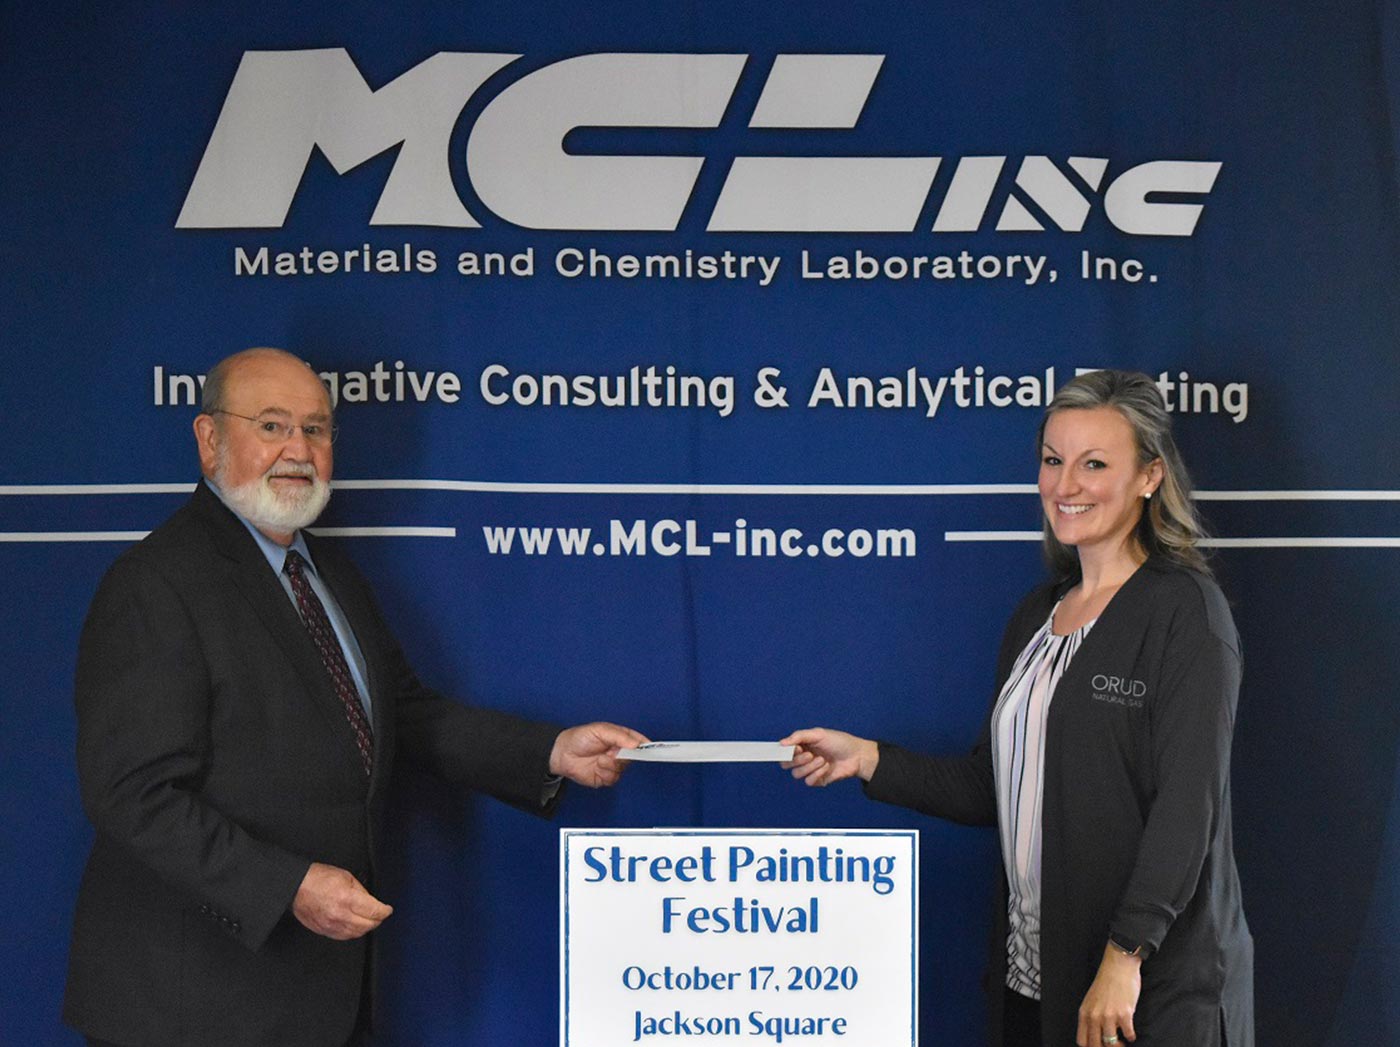 (Photo provided by MCLinc): MCLinc President and CEO Barry Stephenson hands Nikki Adkisson, community service chair for the Rotary Club of Oak Ridge, a check for a Platinum Sponsorship of the Oak Ridge Street Painting Festival.